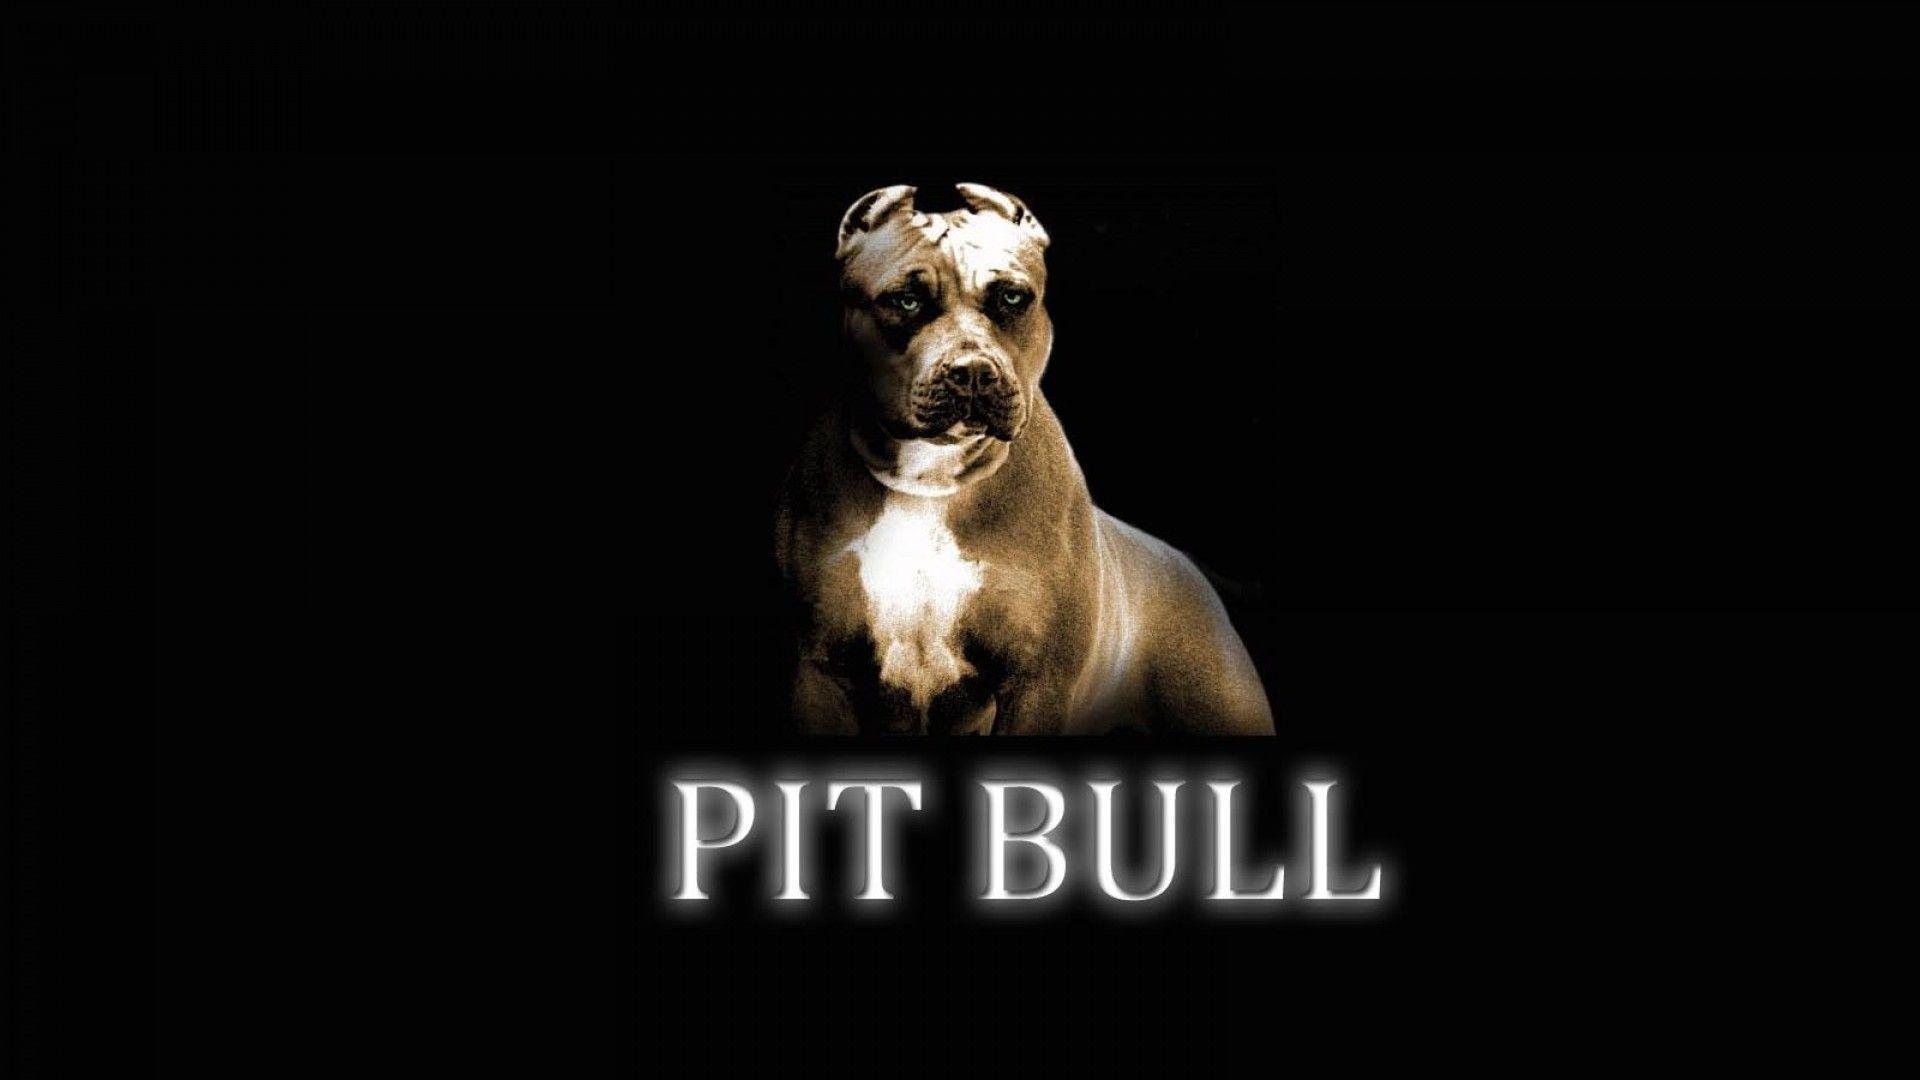 Pitbull Dog Wallpaper Hd 2 Dogs Wallpaper Dog Breeds Picture. 73